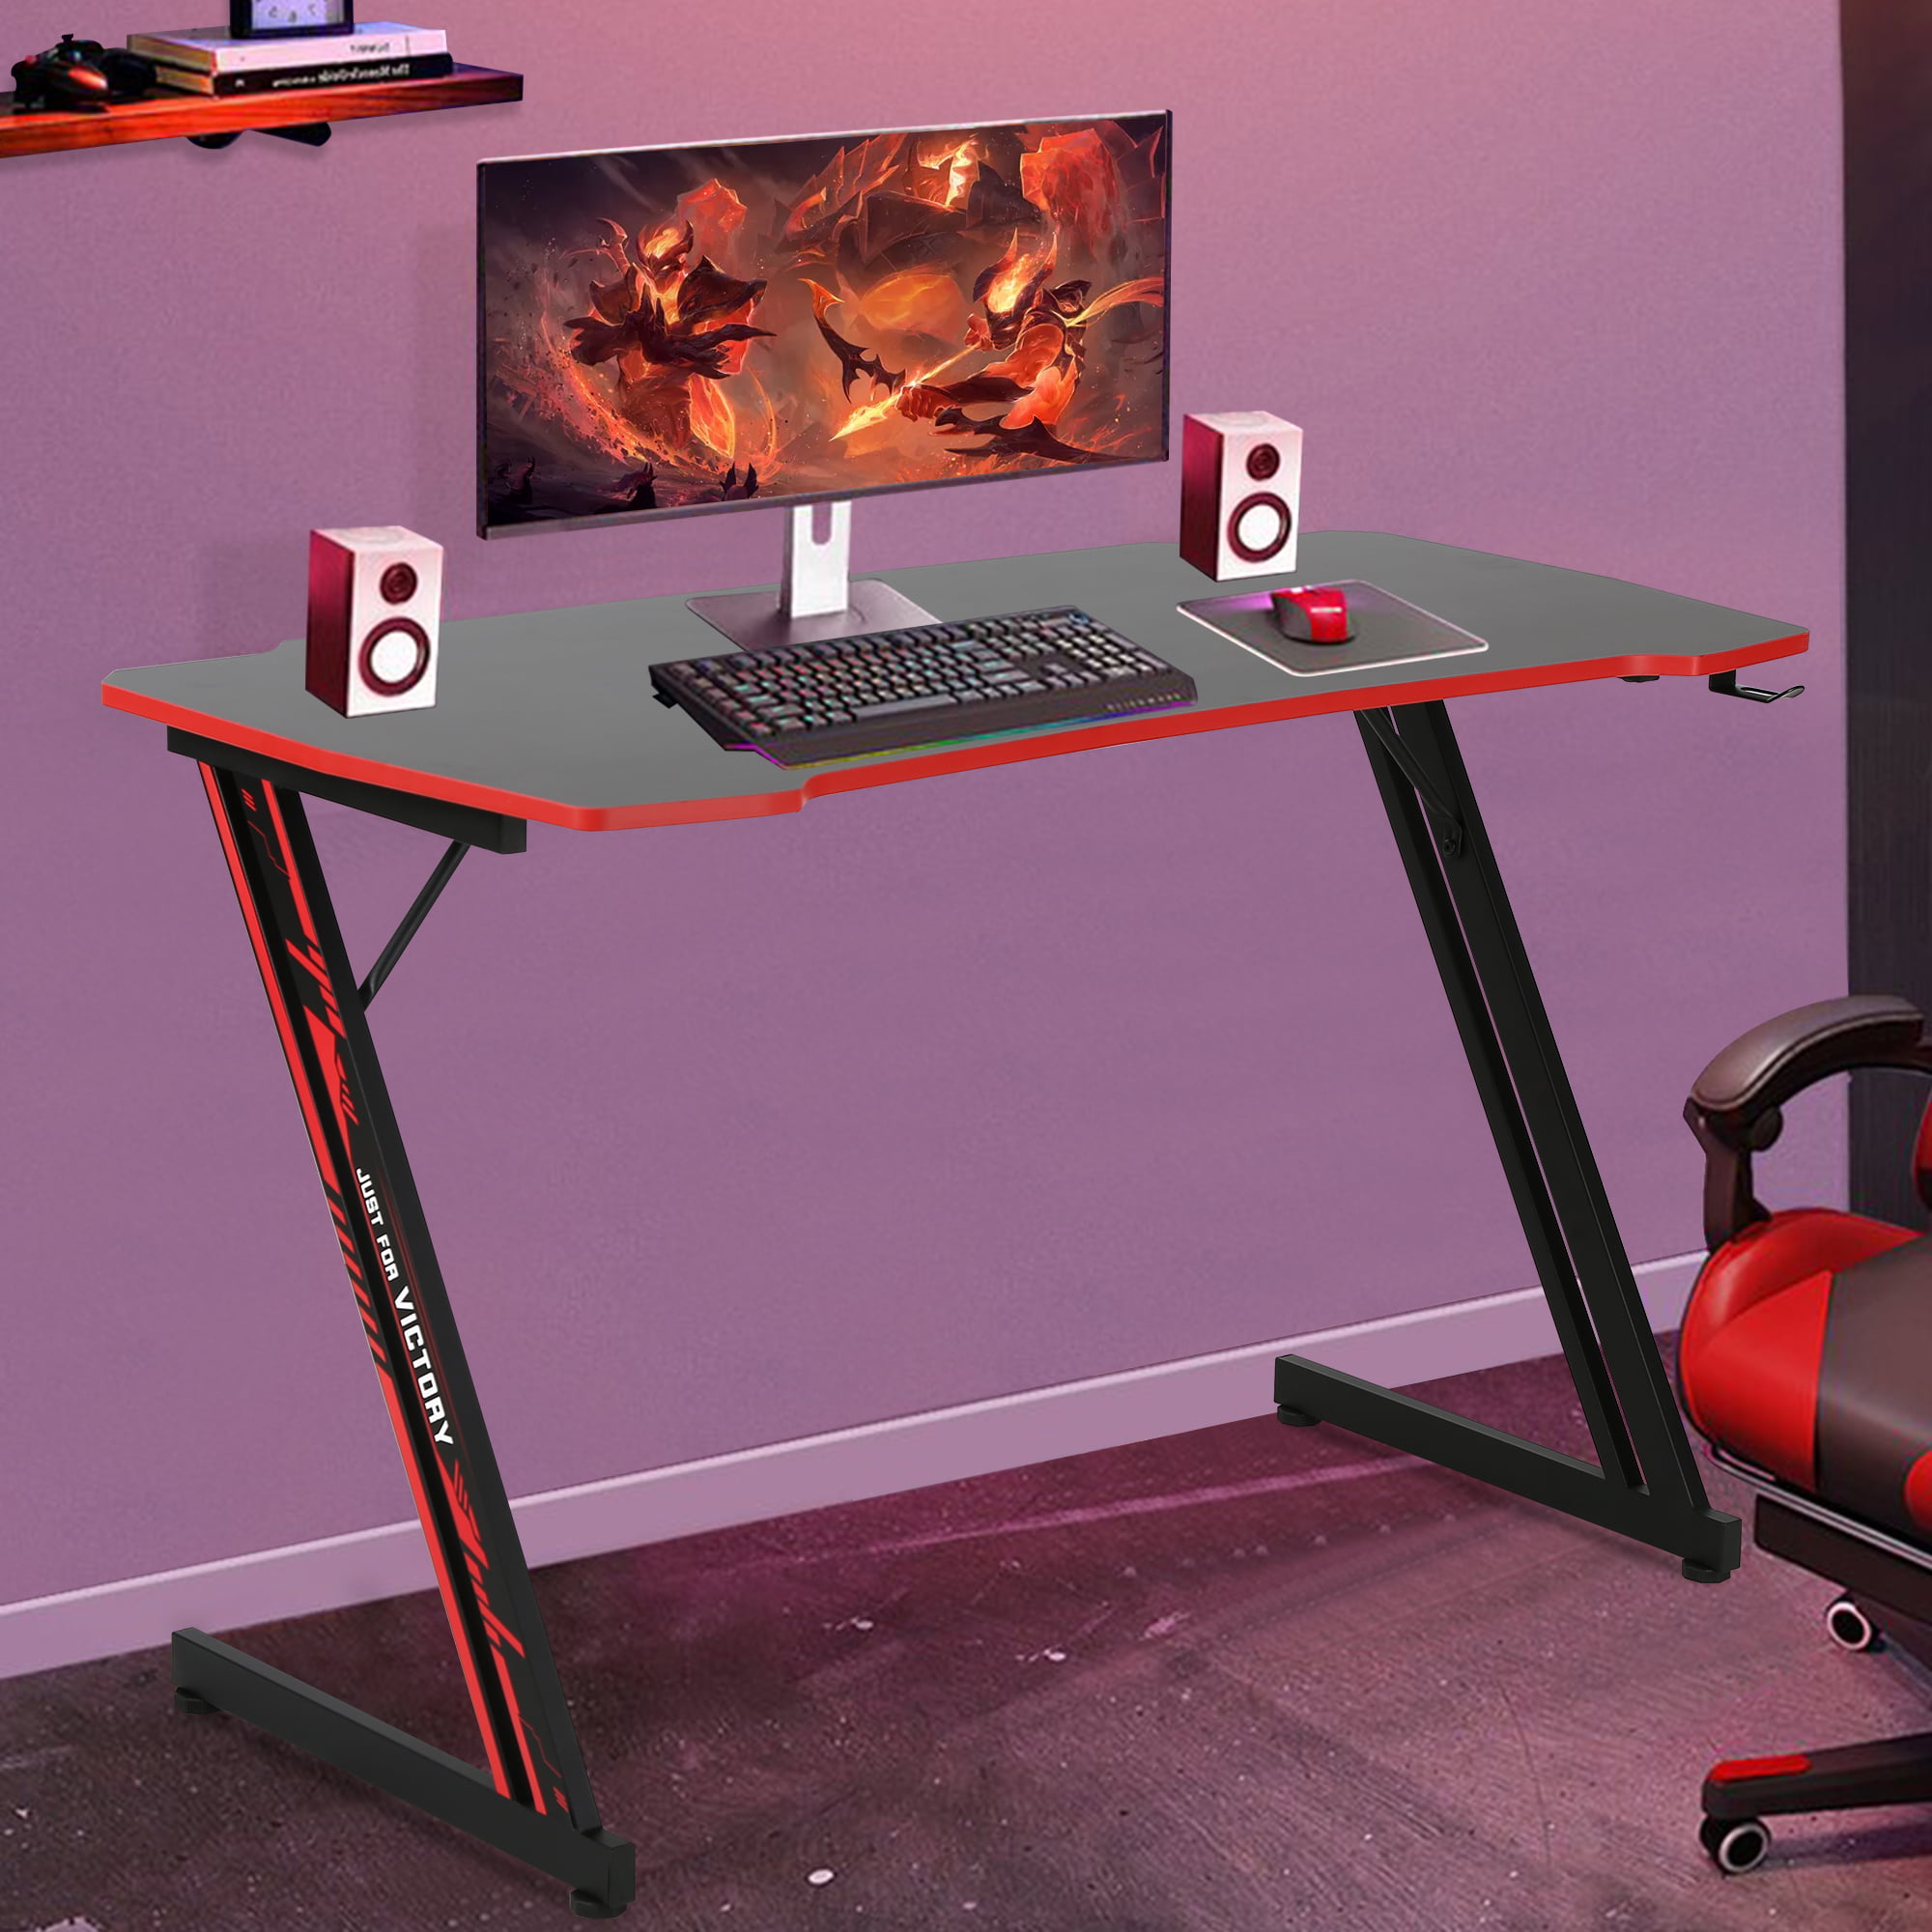 YRLLENSDAN 48 inch Z Shaped Gamaing Desk with Headphone Hook, Wide Gaming Table for PC Playstation Small Computer Desk for Small Area - Walmart.com